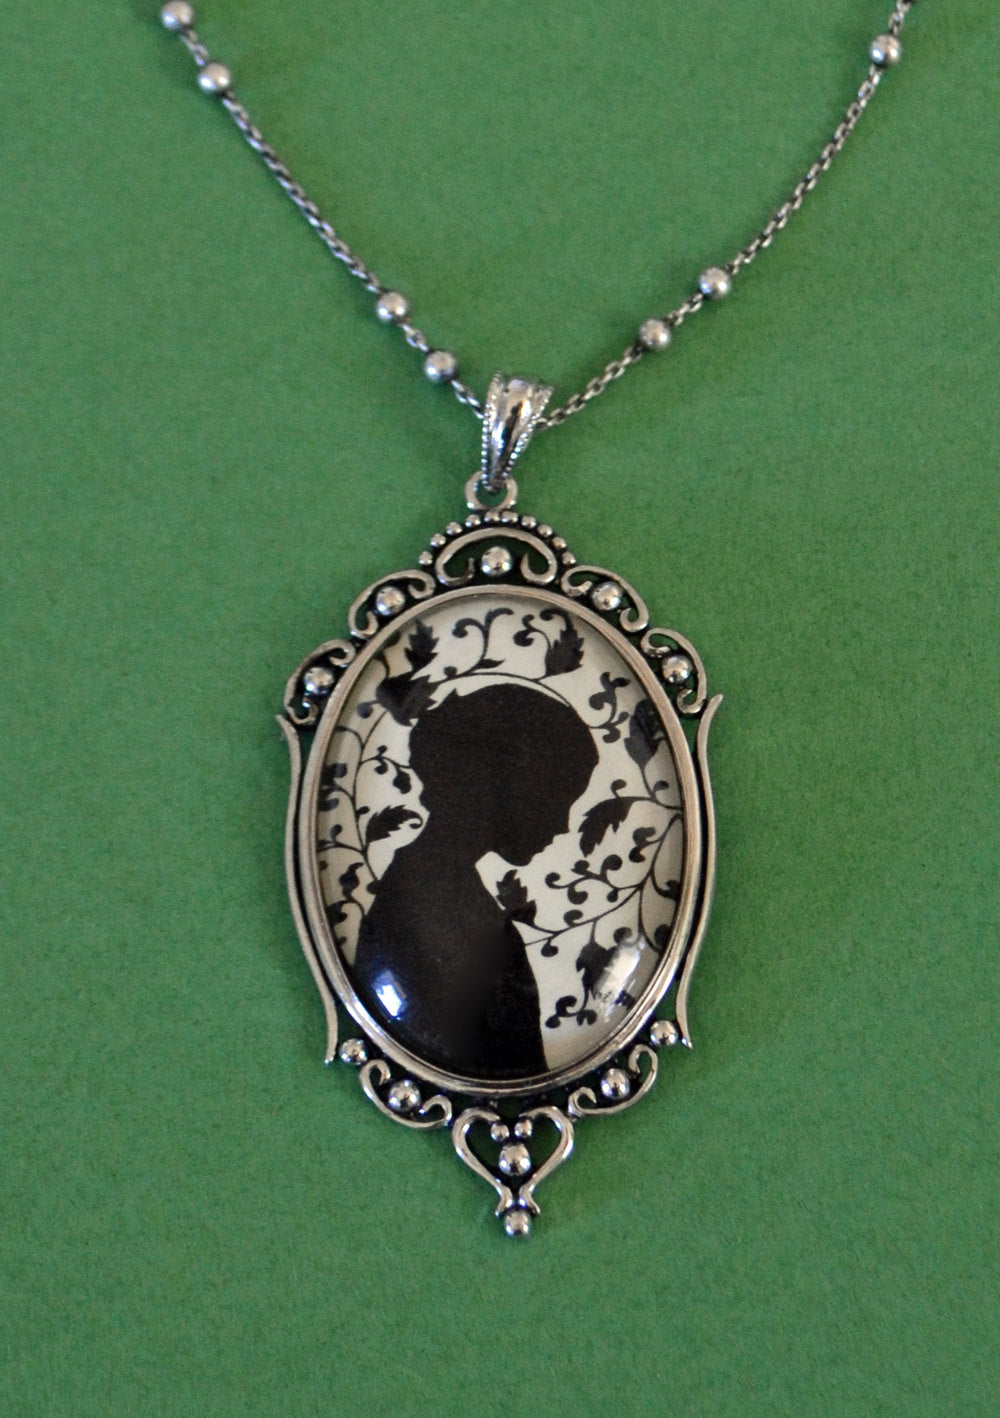 JANE EYRE Necklace, pendant on chain - Silhouette Jewelry